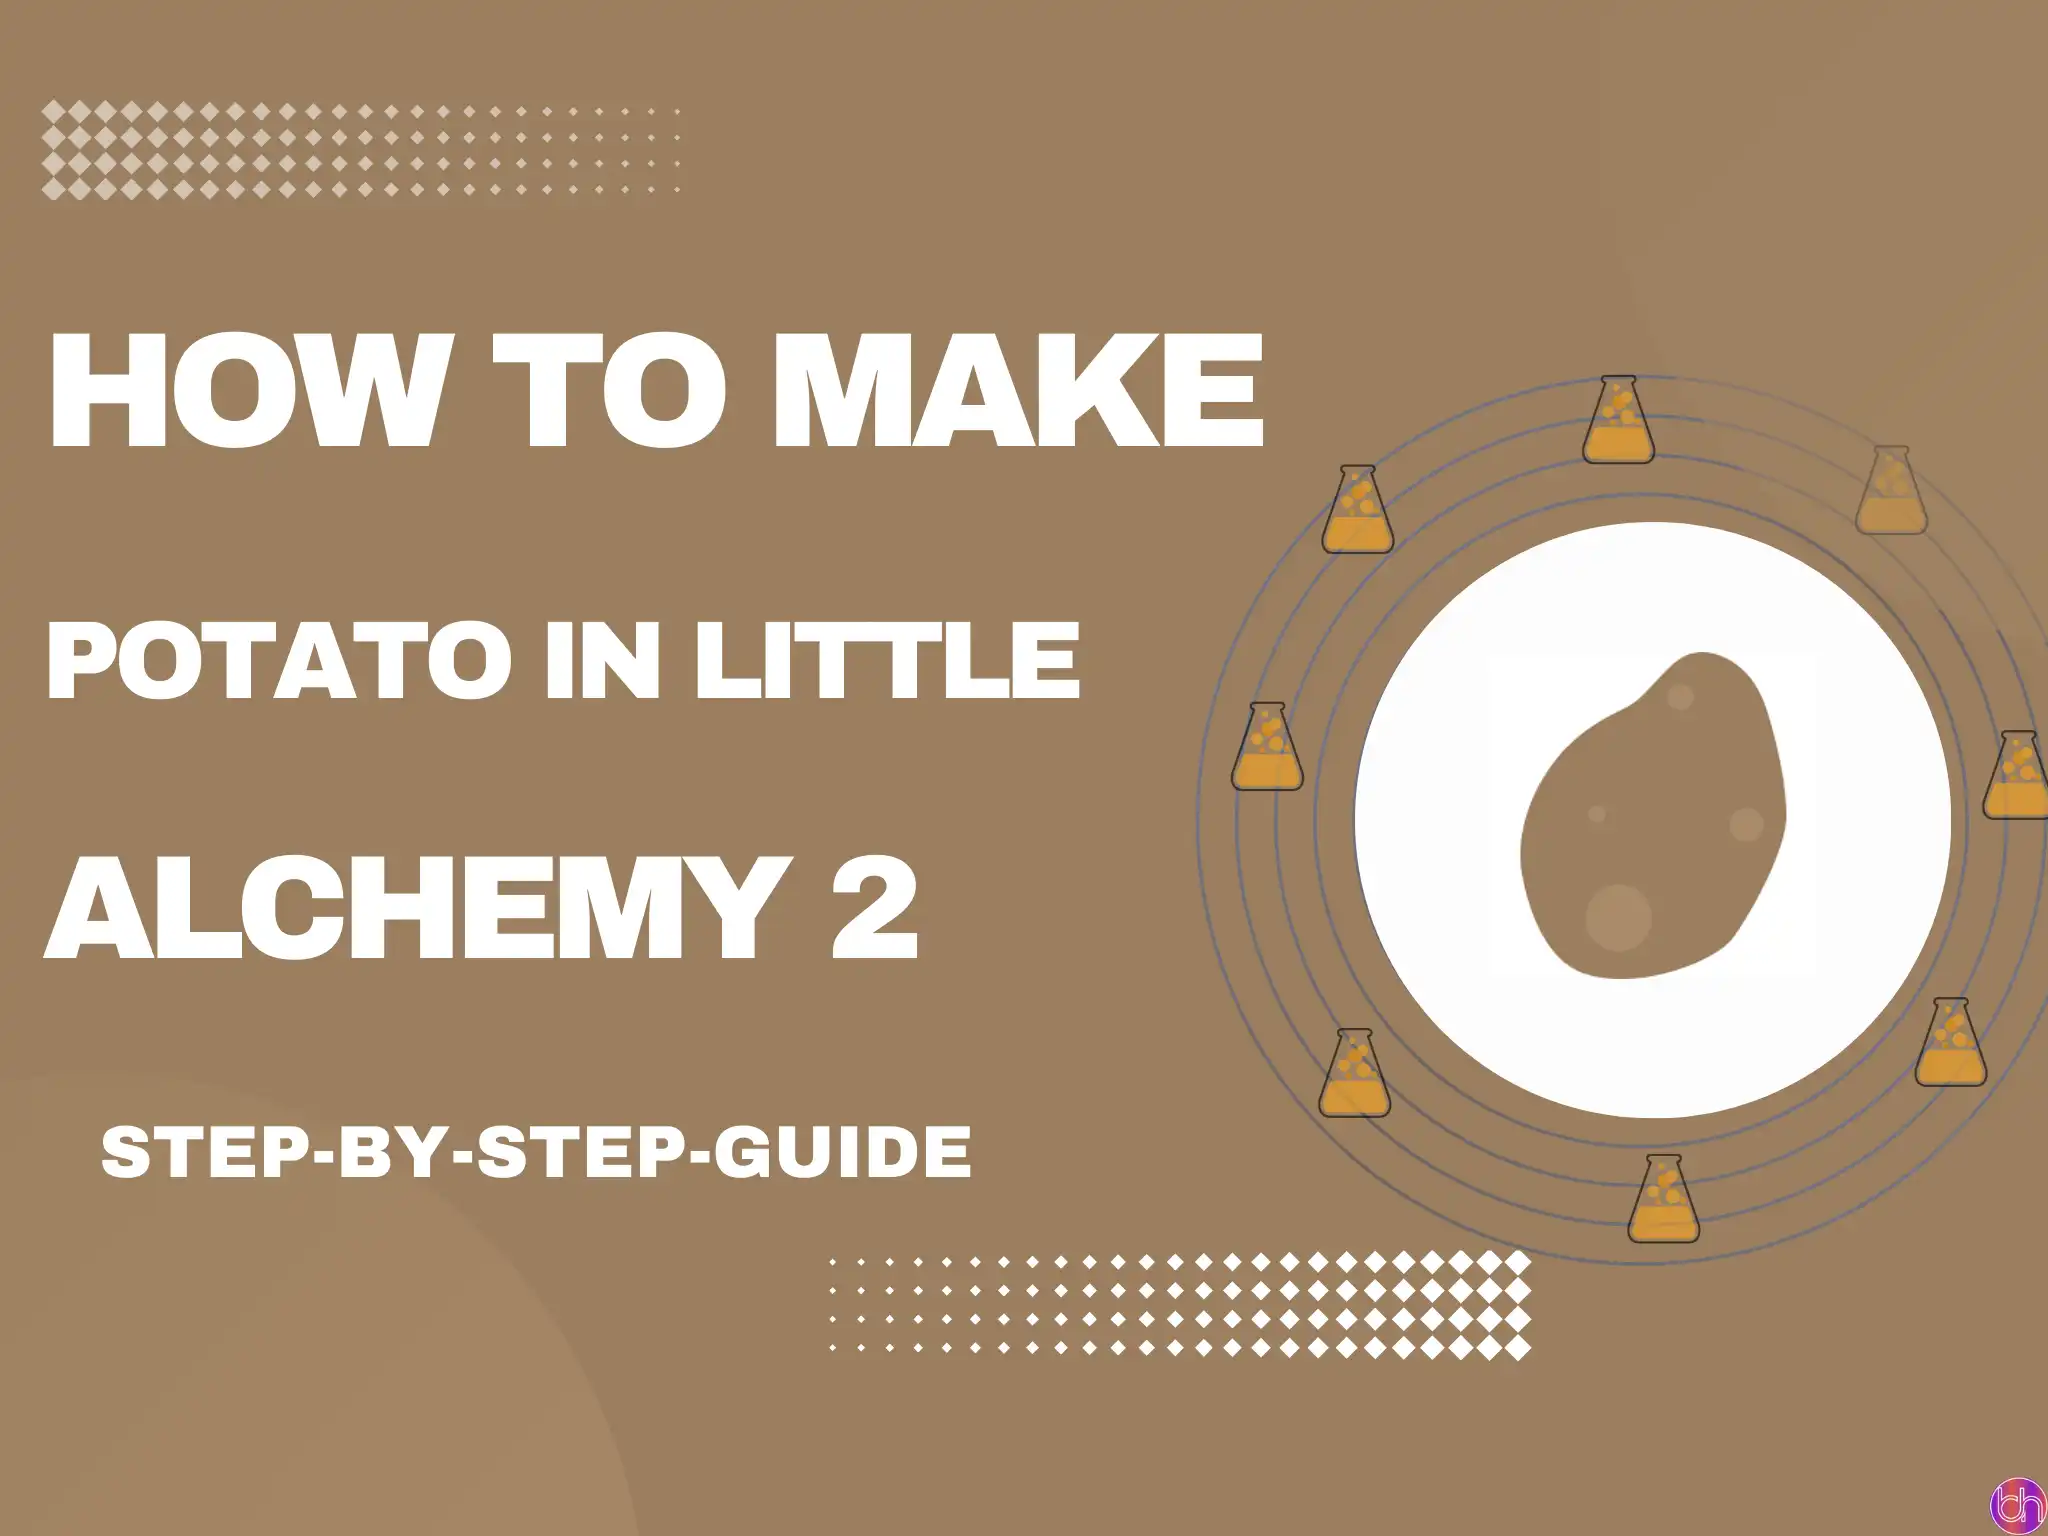 How to make Potato in Little Alchemy 2